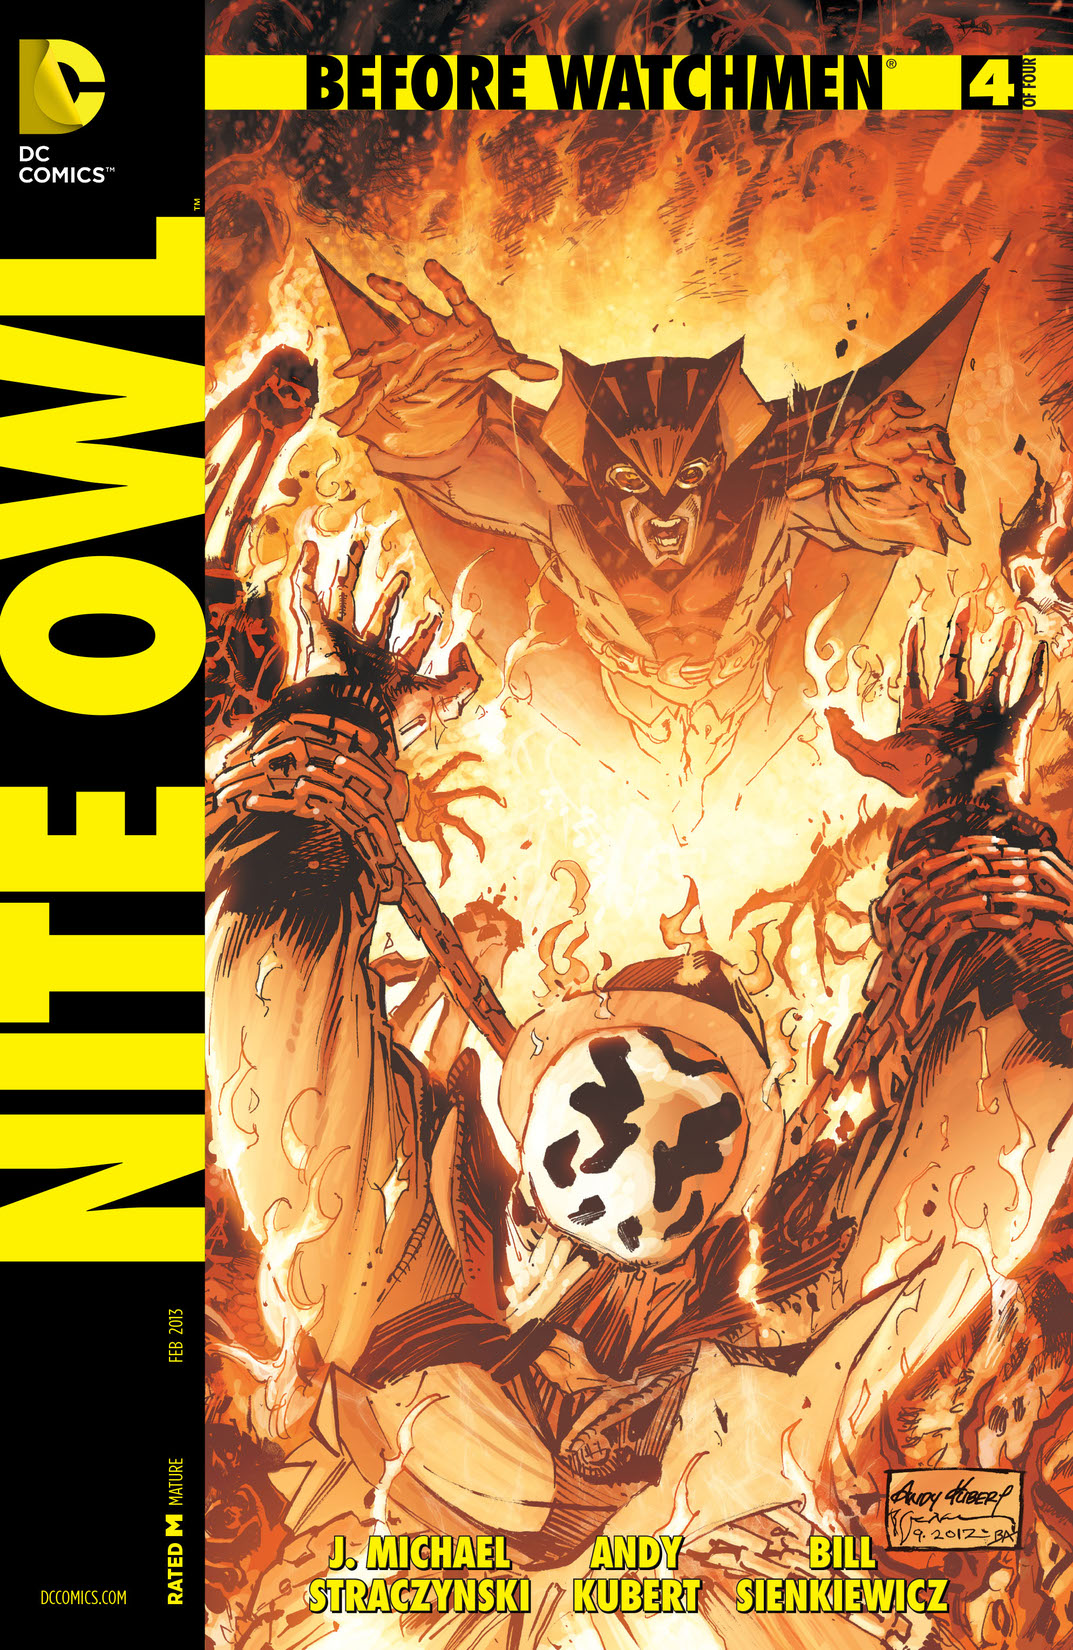 Before Watchmen: Nite Owl #4 preview images